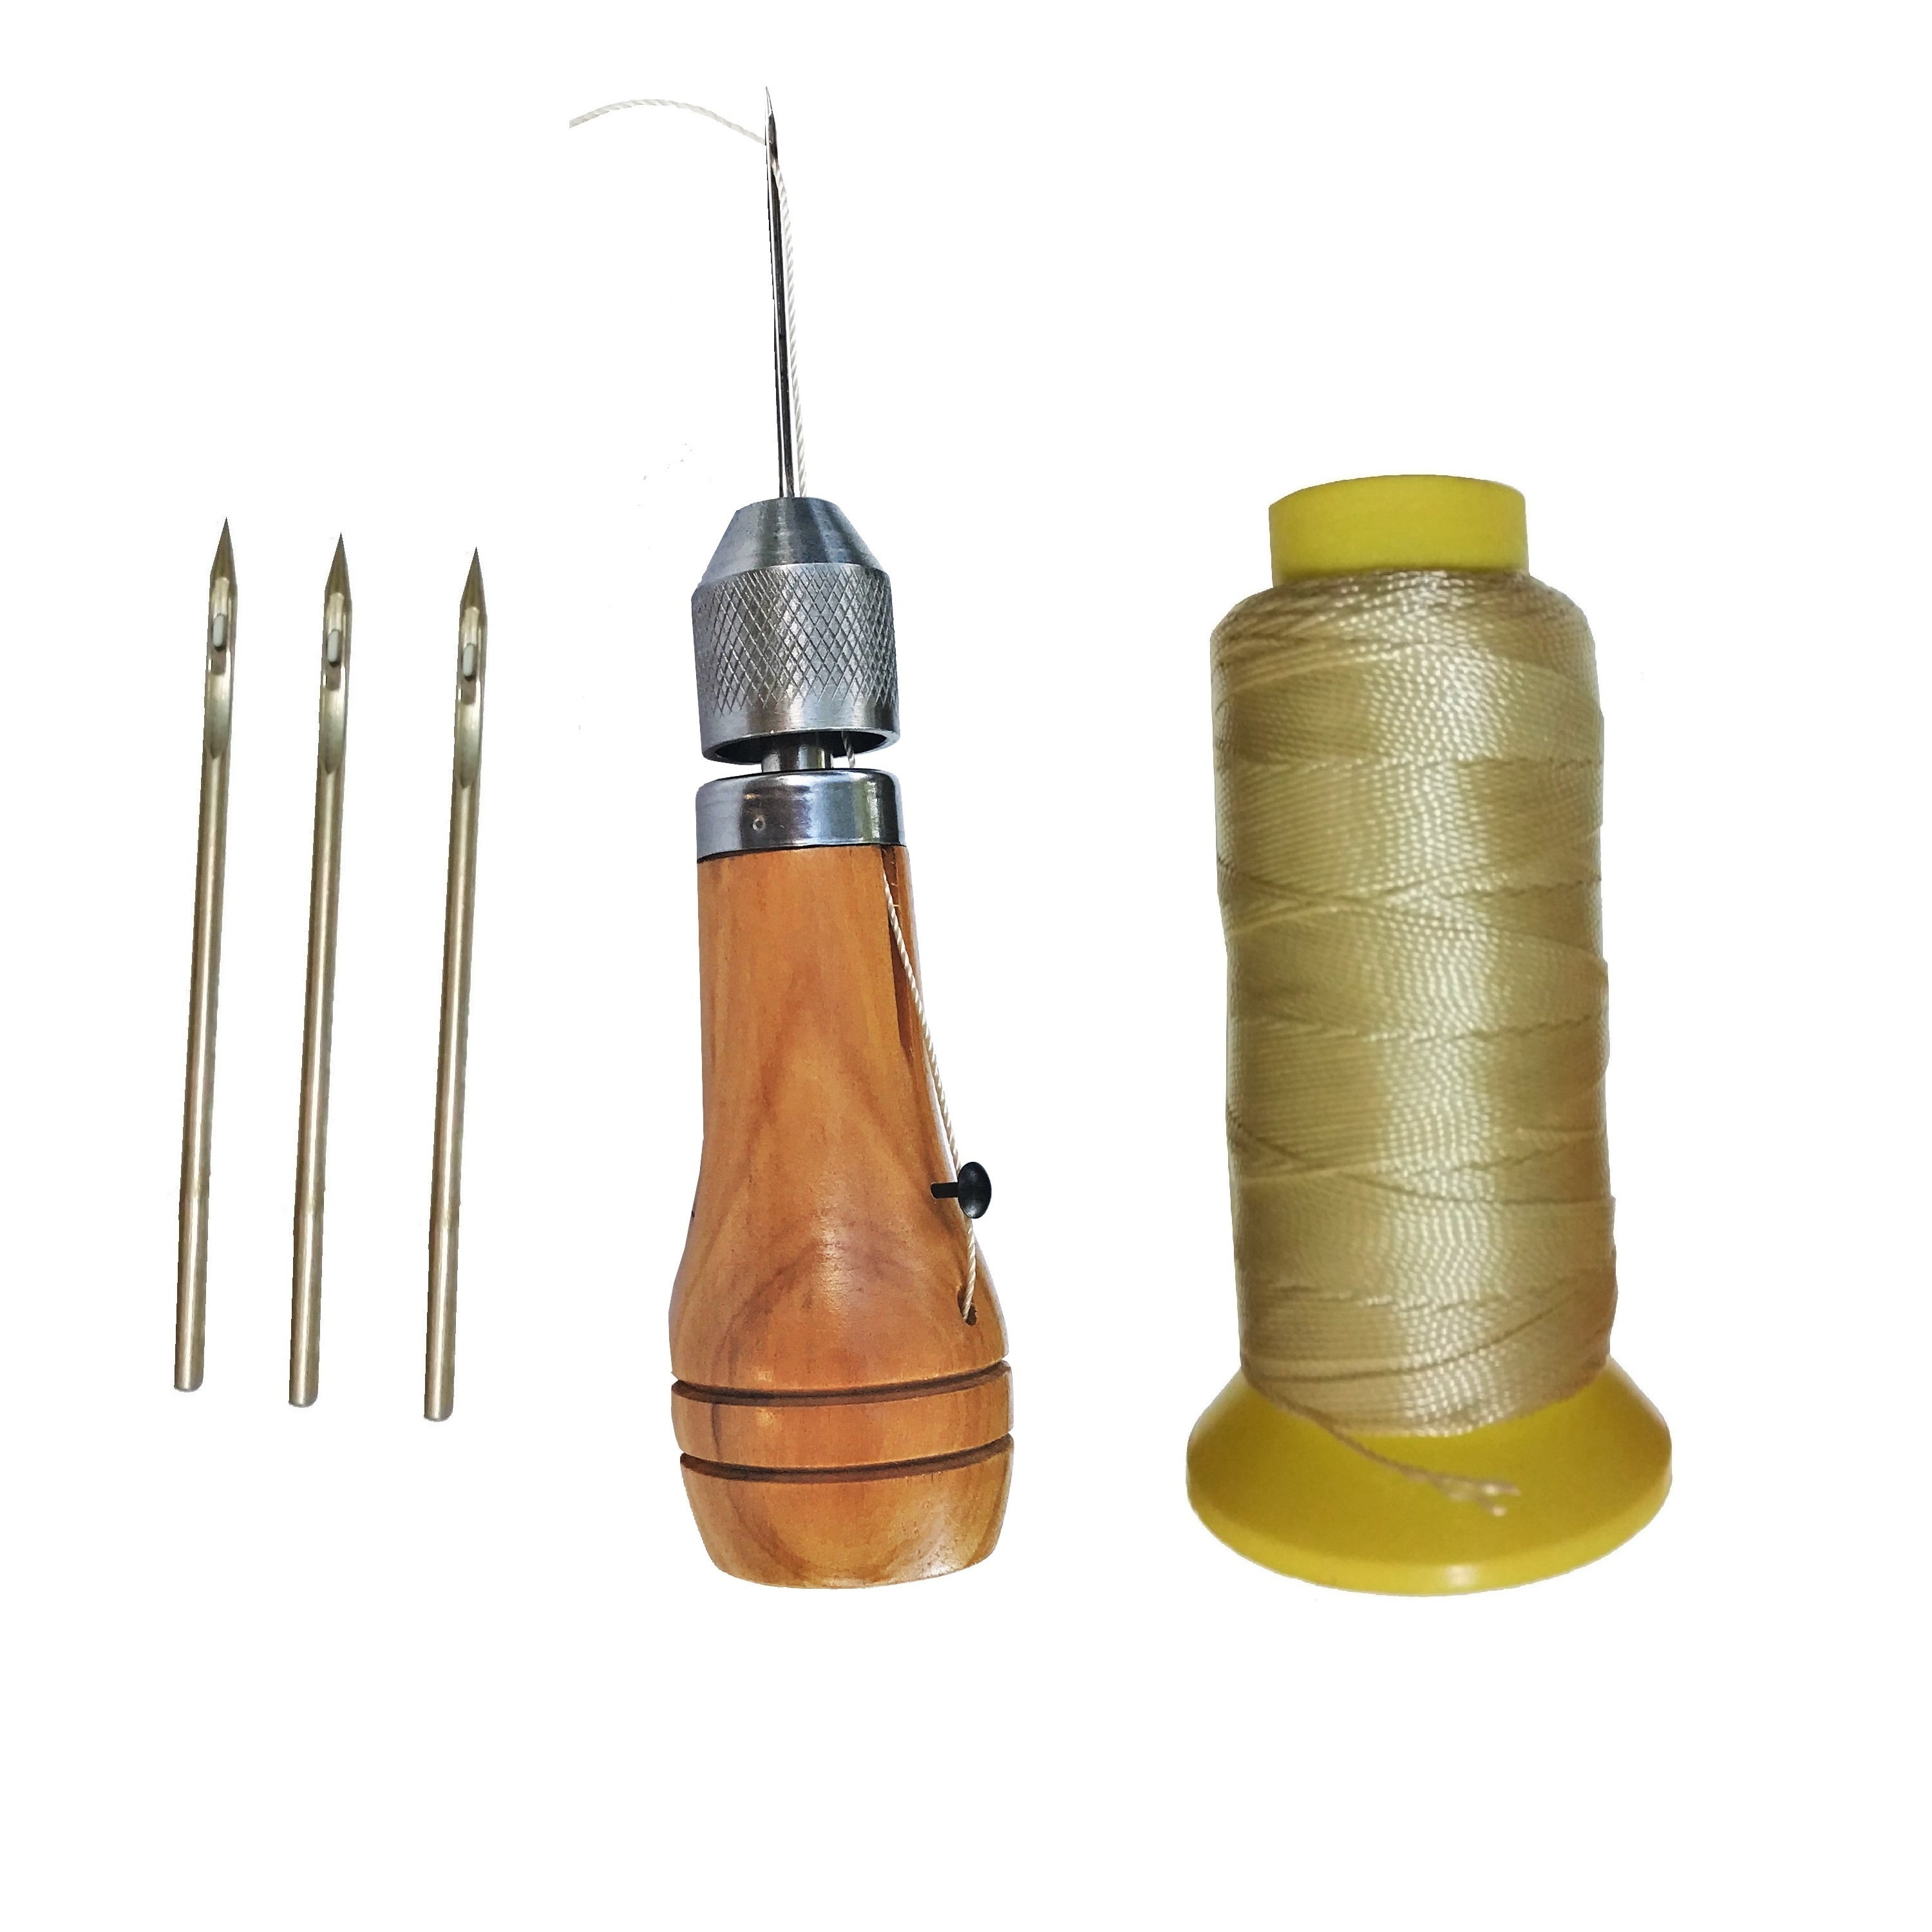 Wood Handle Leather Sewing Awl Kit,Hand Stitcher Professional Handmade  Leather Wood Handmade Leather Sewing Machine Lock Stitching Tool Kit Handle